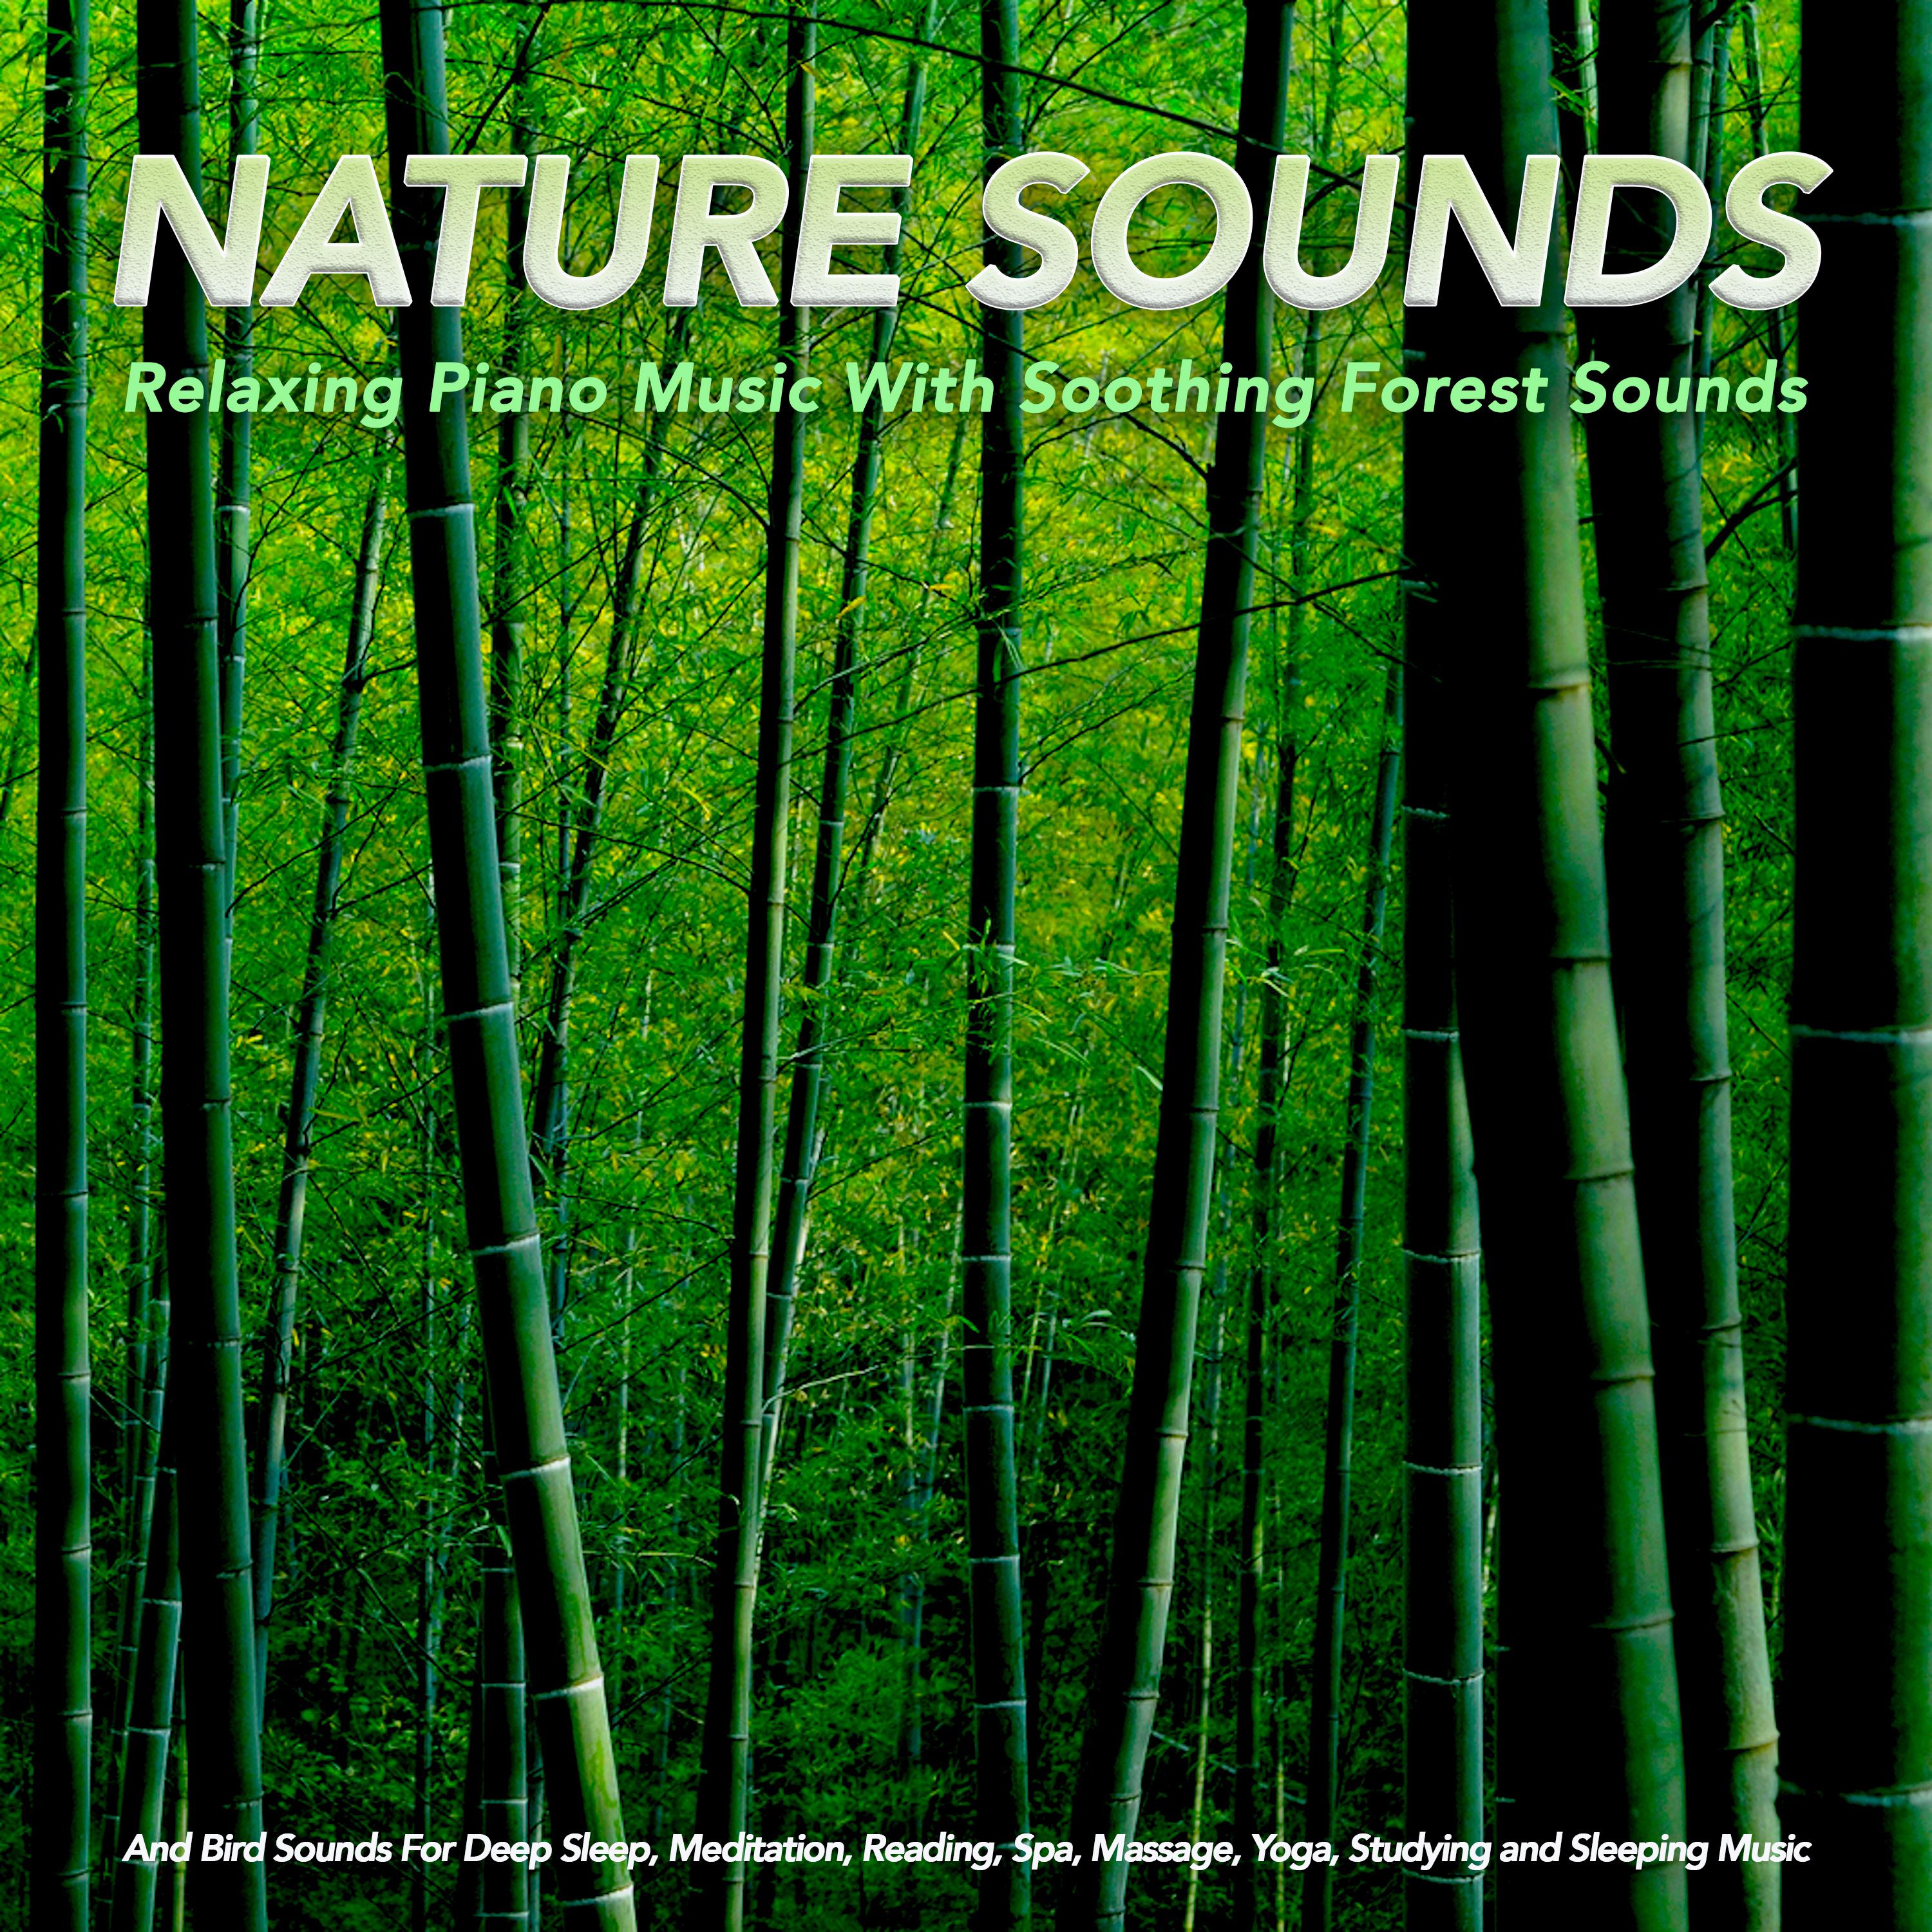 Nature Sounds For a Relaxing Massage